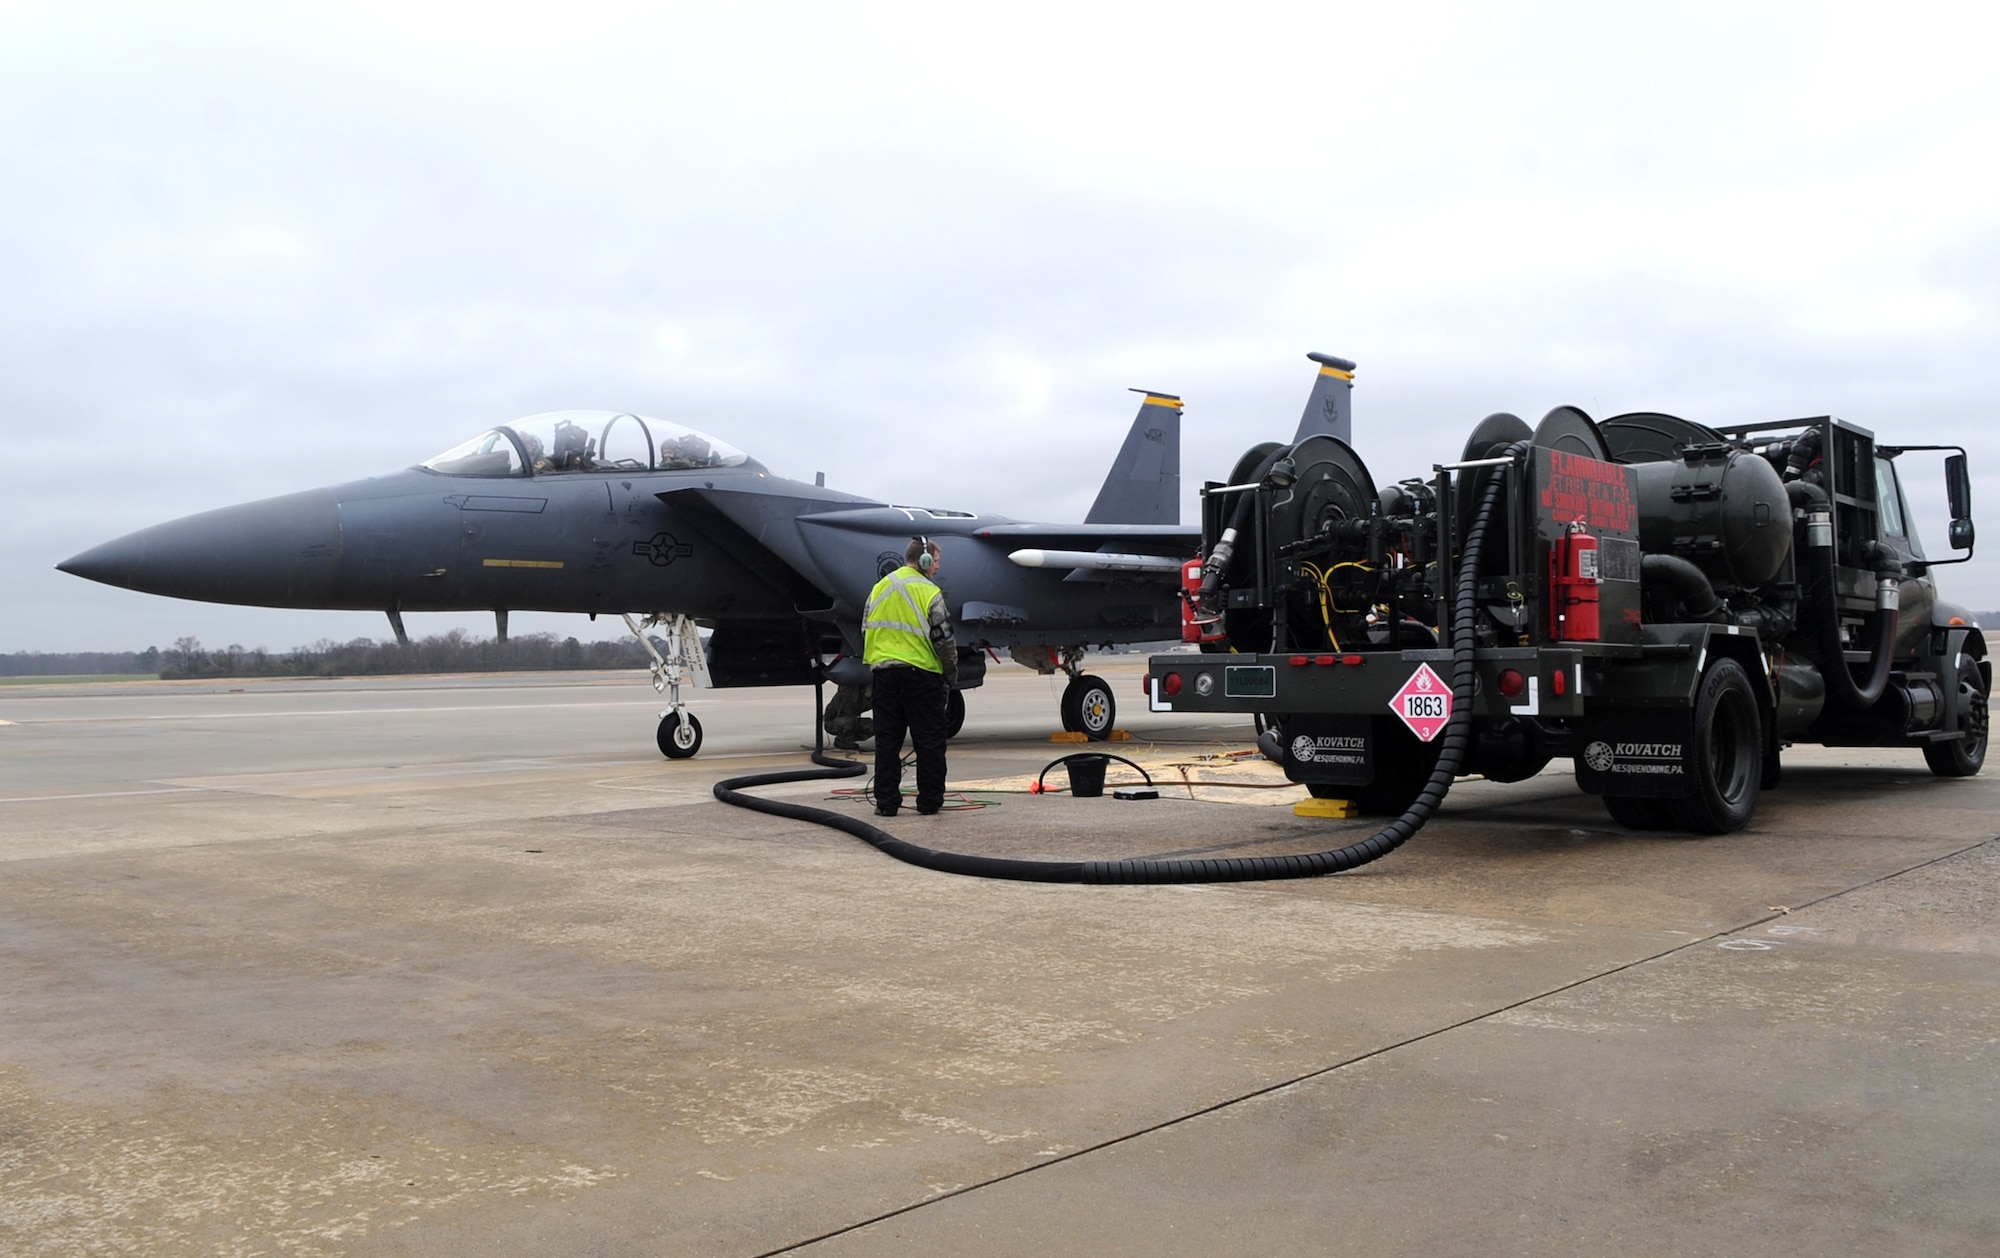 Airmen perform a hot pit refuel on an F-15E Strike Eagle Feb. 10, 2015, at Seymour Johnson Air Force Base, N.C. Petroleum, oil and lubricants Airmen provide the fuel trucks for hot pit refueling operations and monitor the process. The Airmen are assigned to the 335th Aircraft Maintenance Unit and the 4th Logistics Readiness Squadron, and the F-15E is assigned to the 335th Fighter Squadron. (U.S. Air Force photo/Senior Airman Ashley J. Thum)